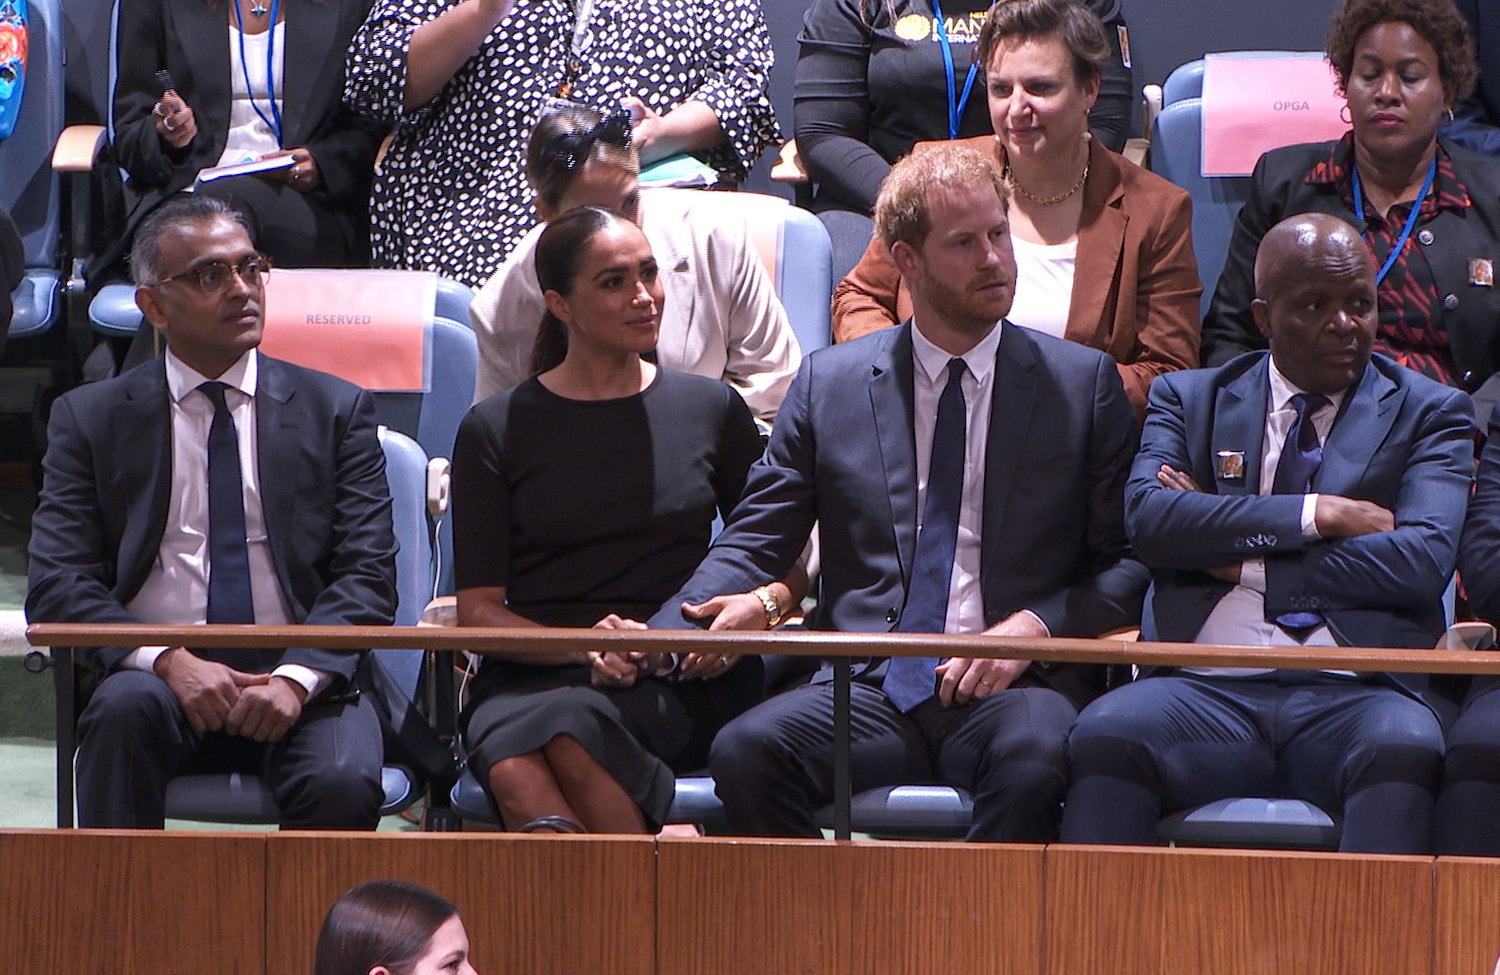 Meghan Markle pulls Prince Harry's arm to her lap at the UN general assembly